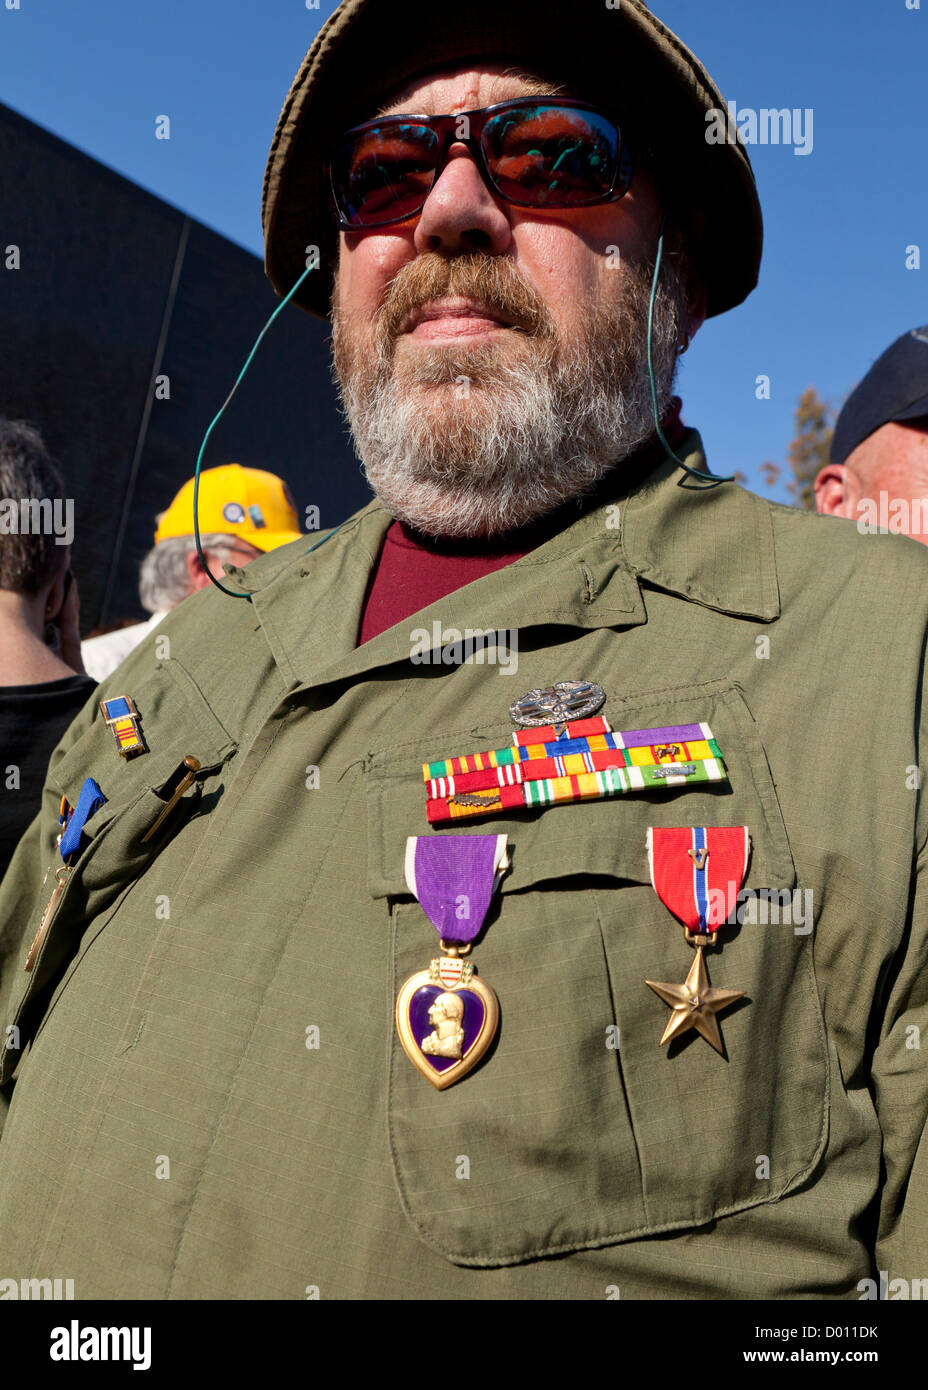 US Vietnam War veteran with medals and honors Stock Photo